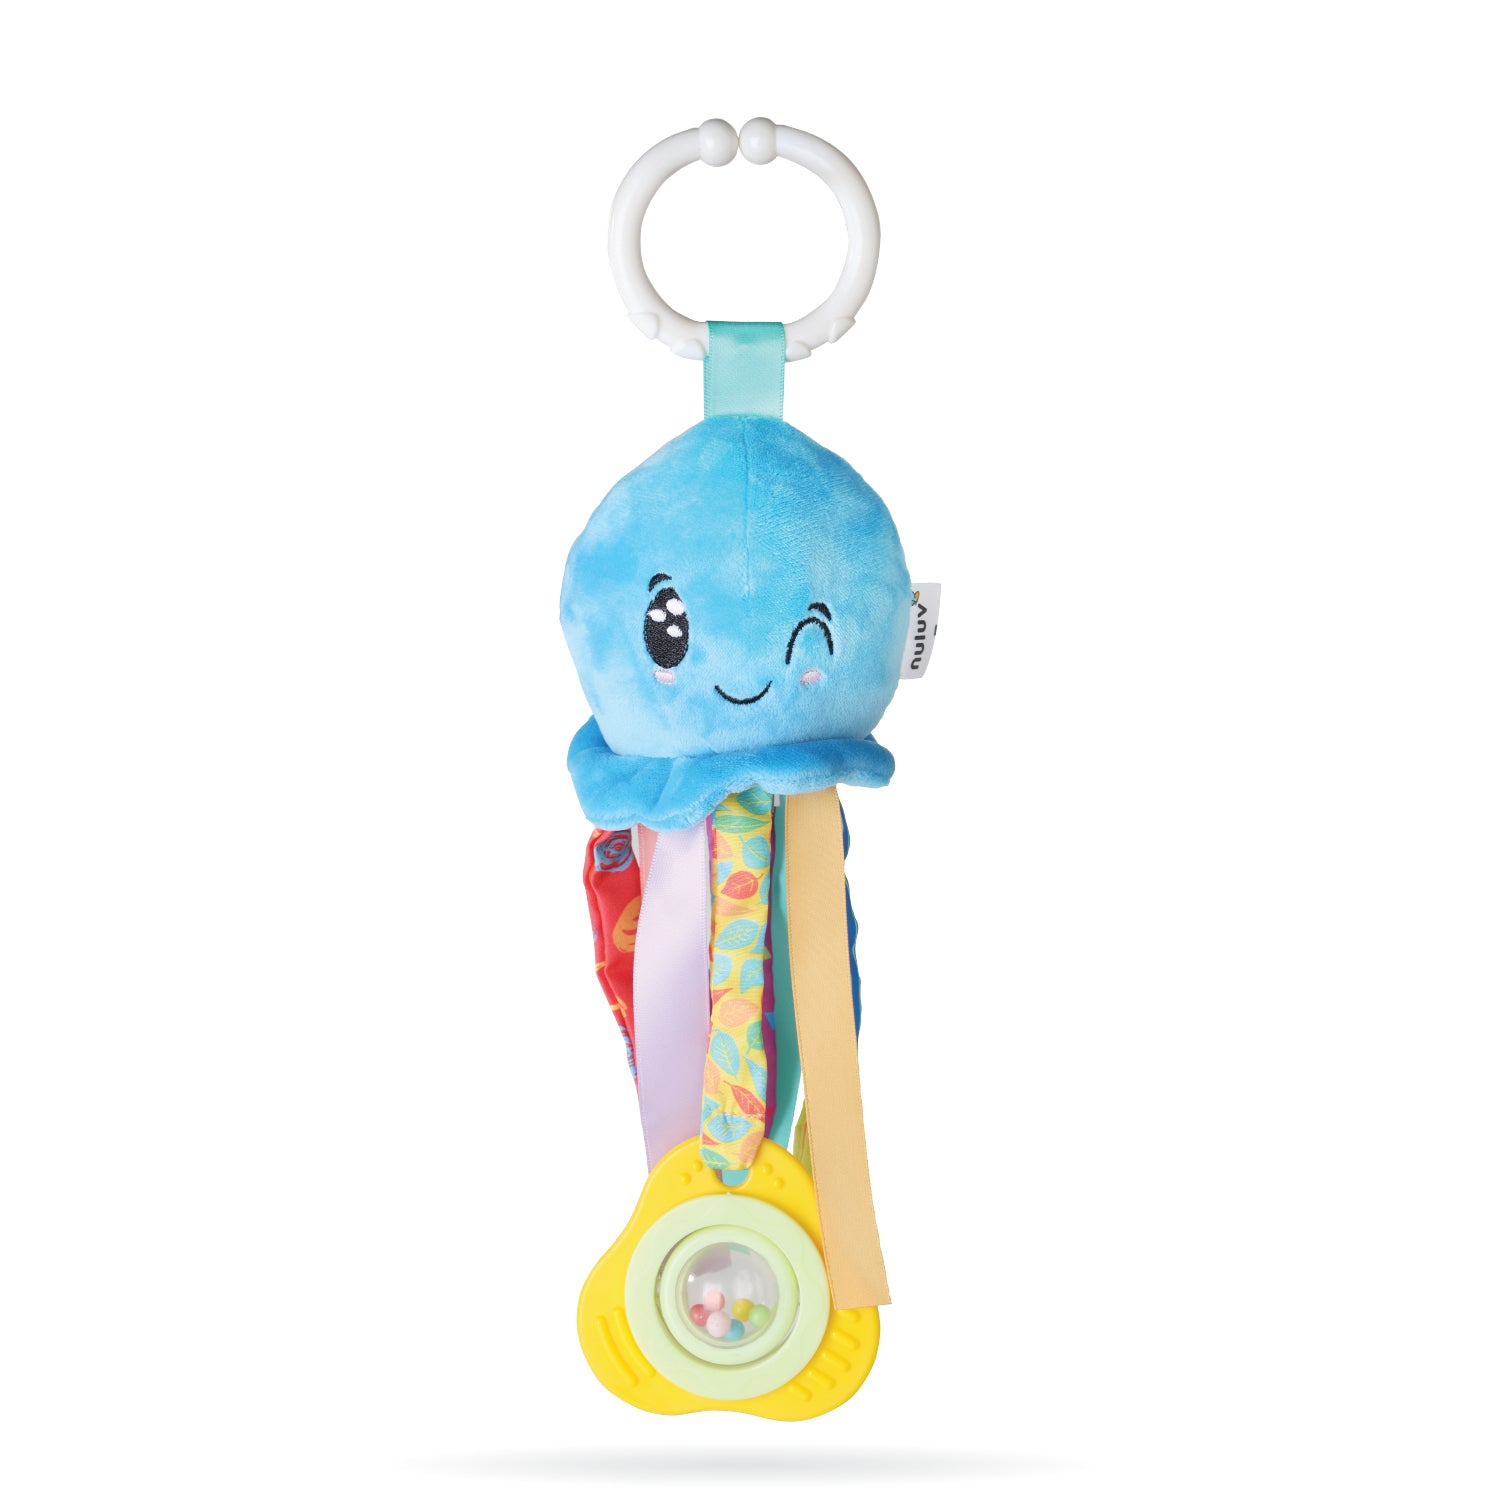 Nuluv Waves Octopus Plush Toy I Hanging Rattle & Teether I Stroller Toy for Baby 3 Months+